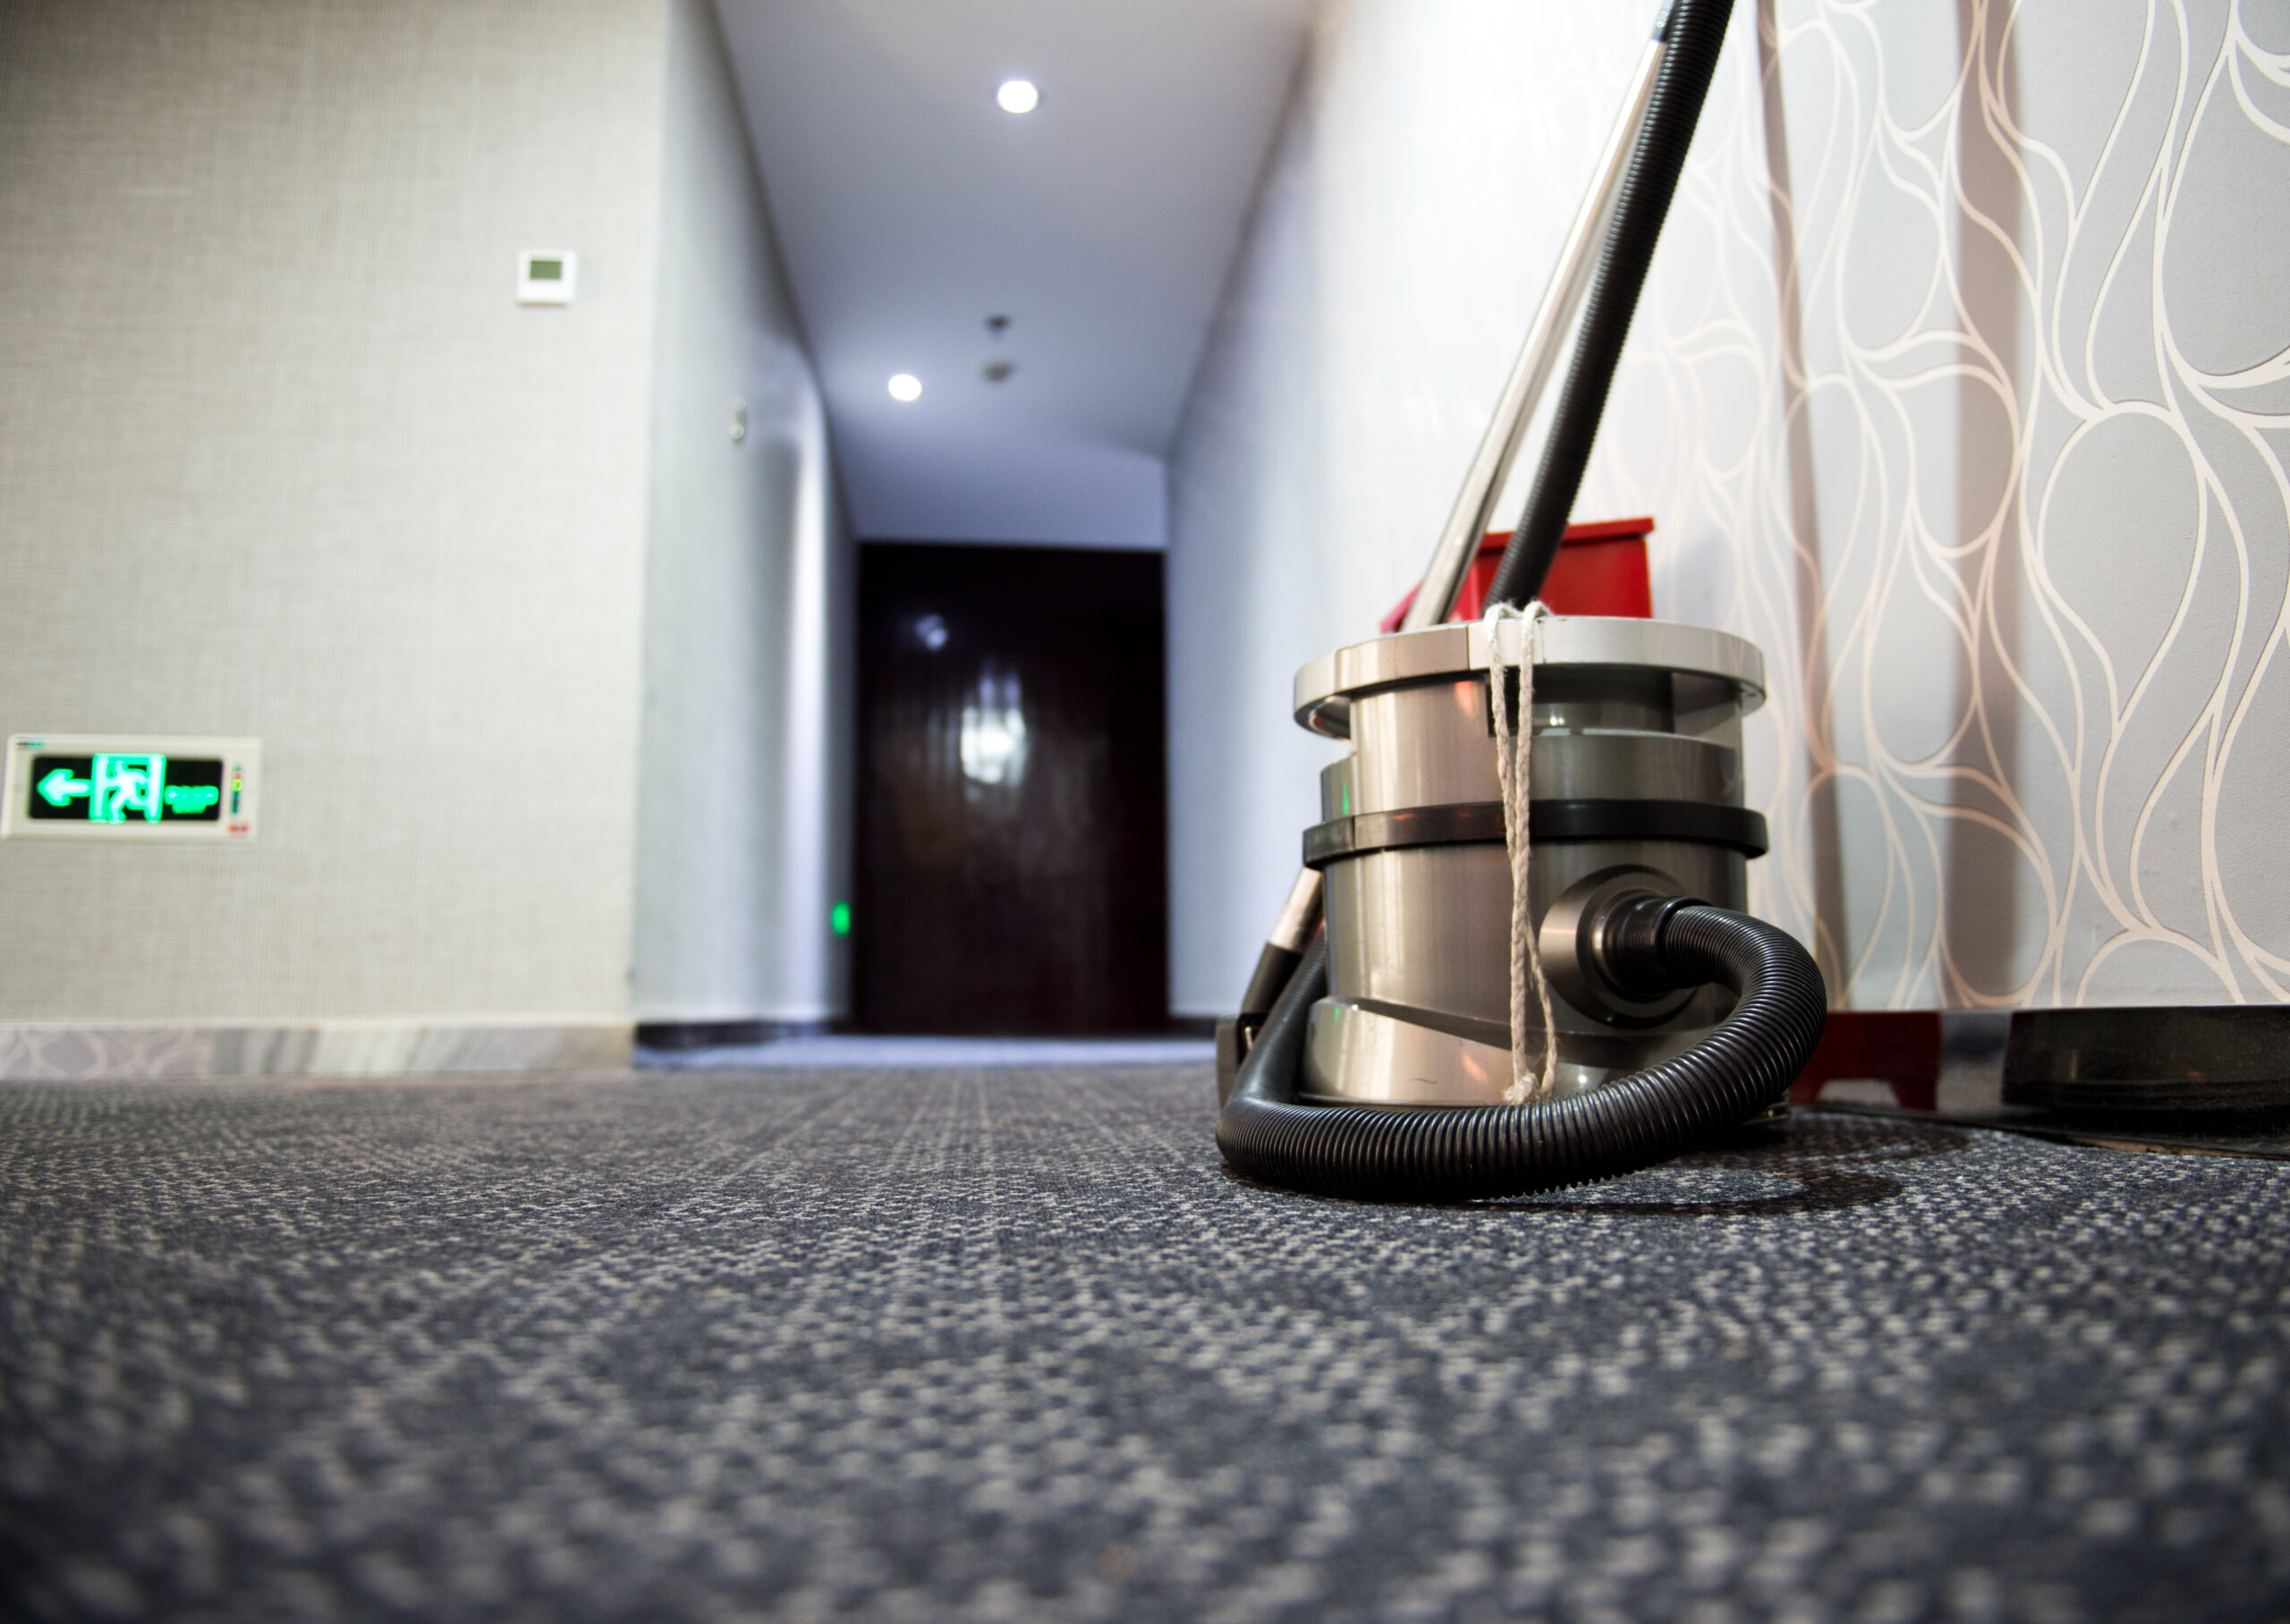 best carpet cleaning